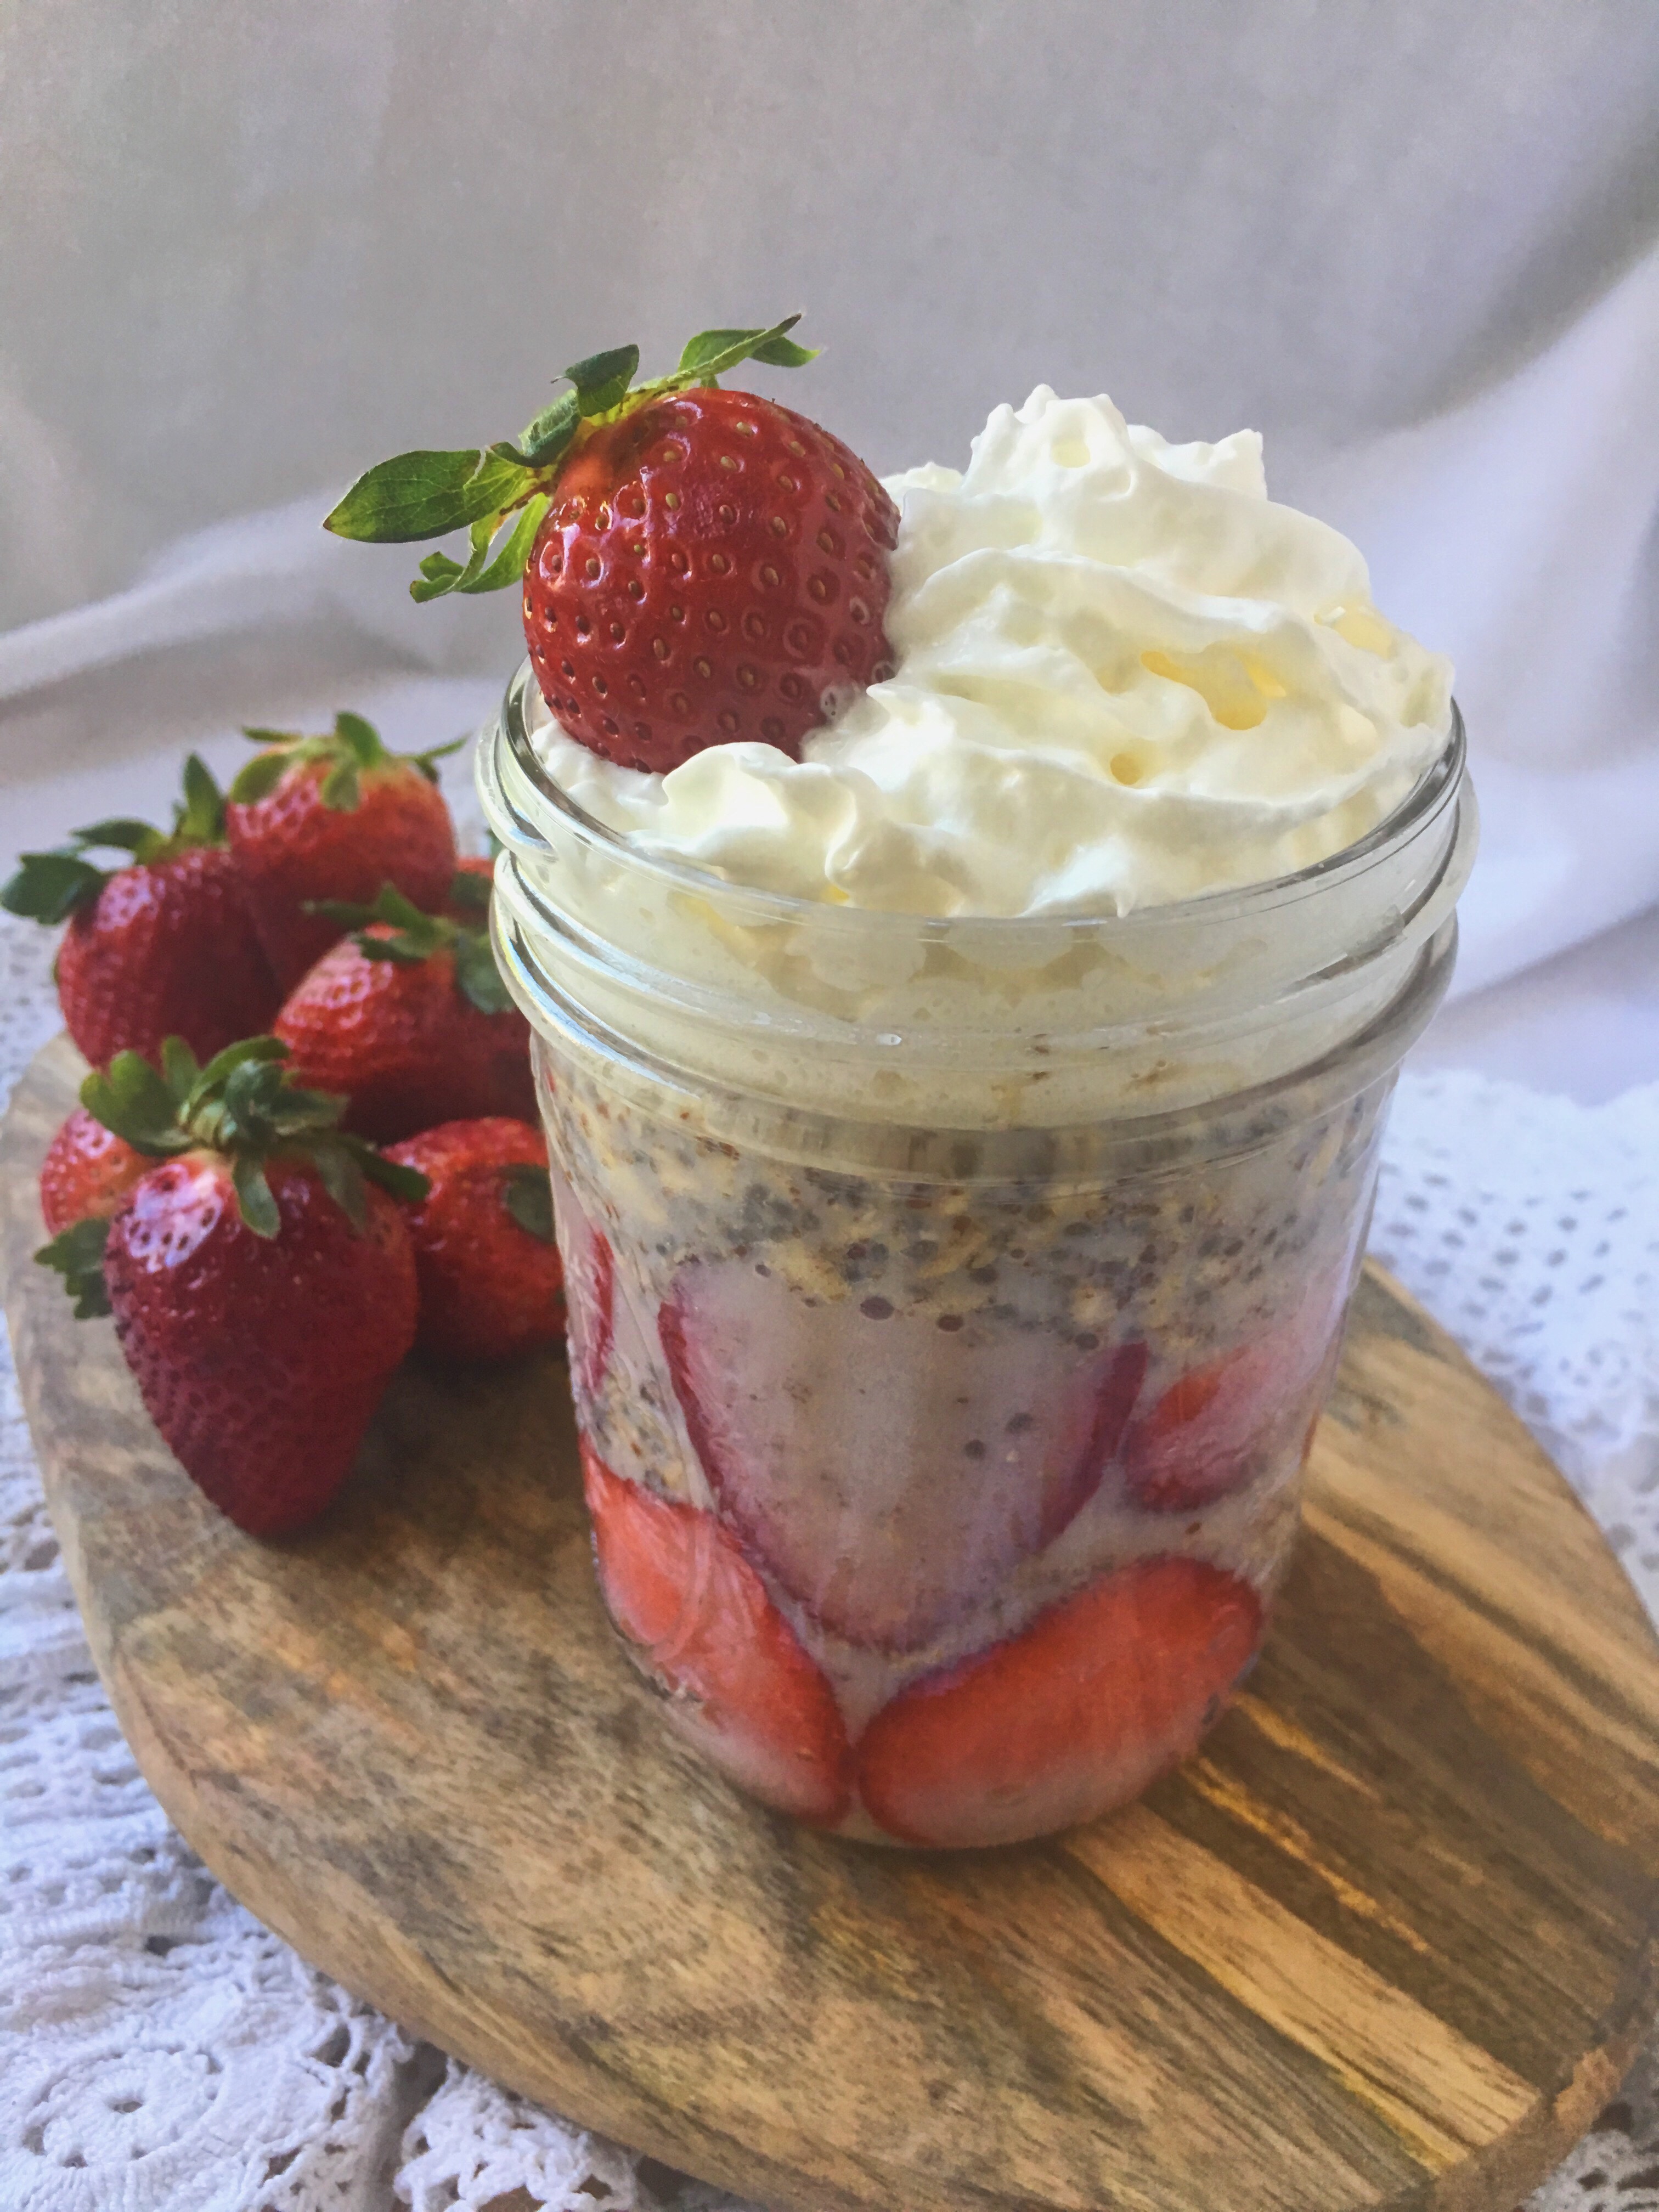 Delicious strawberries and cream overnight oats with chia seeds and flax seeds.